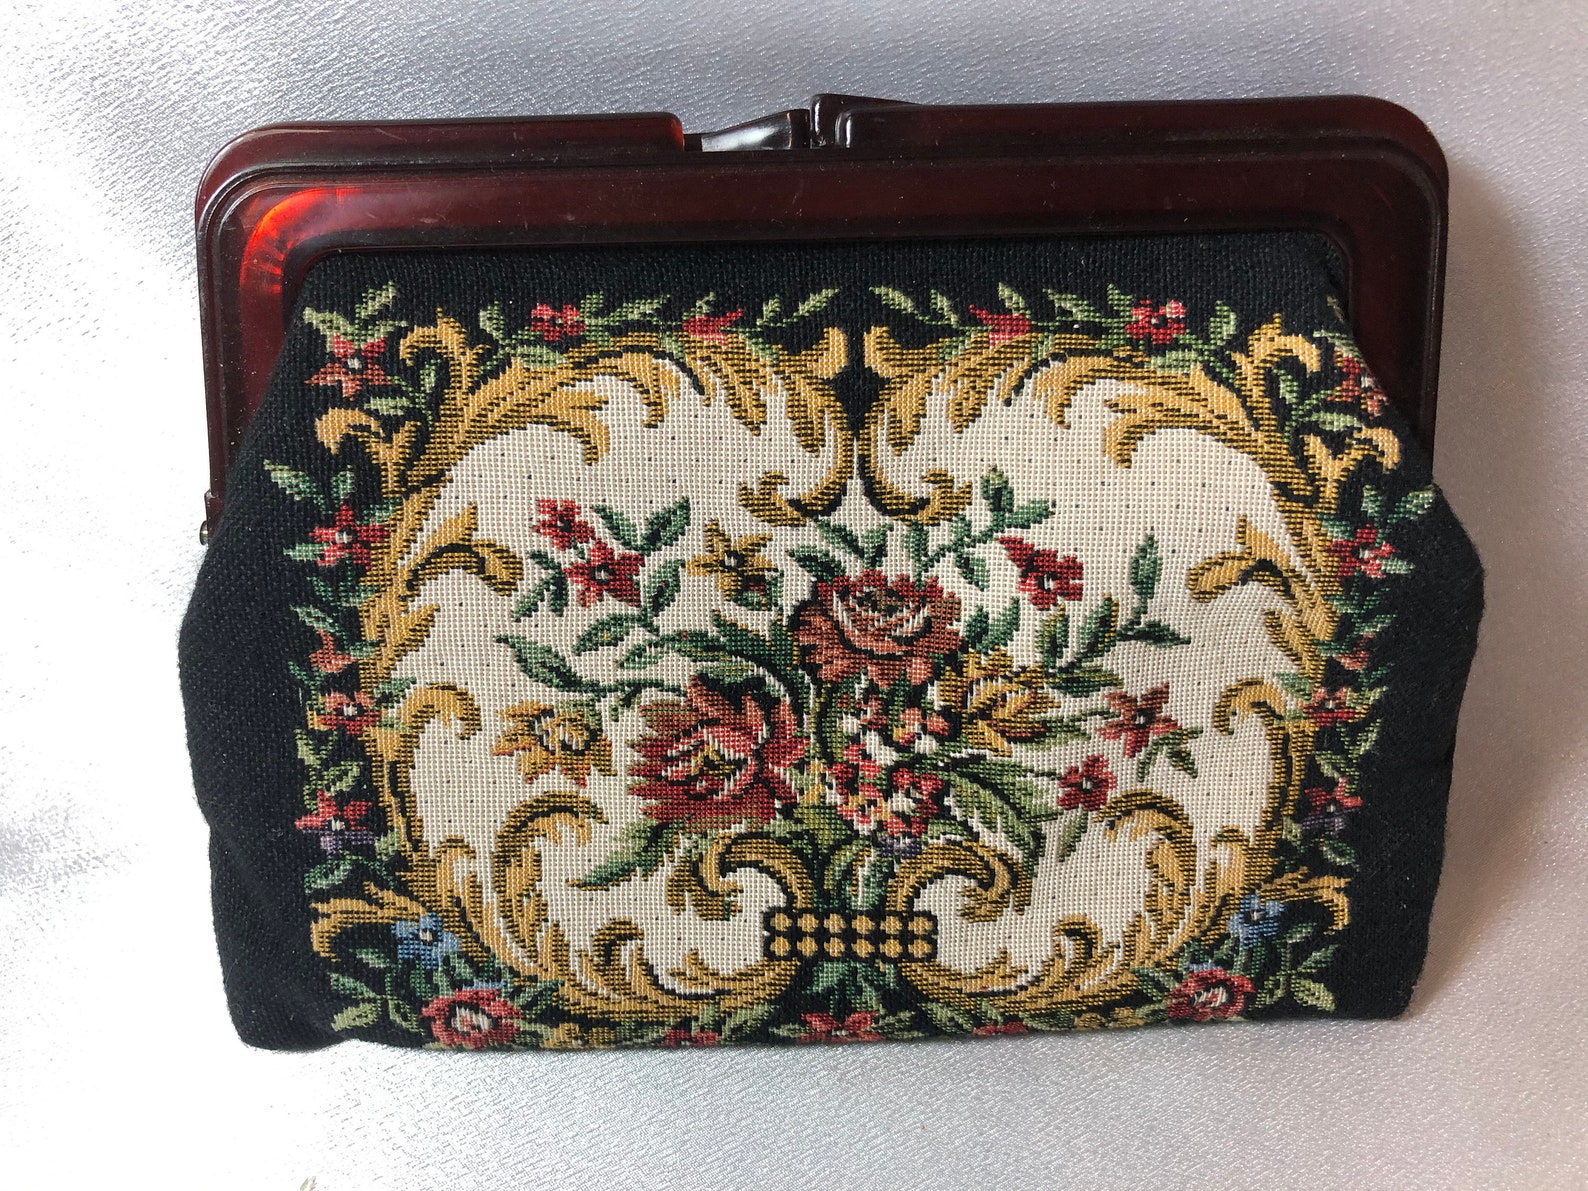 Vintage Needlepoint Clutch Purse with Floral Design clutch | Etsy